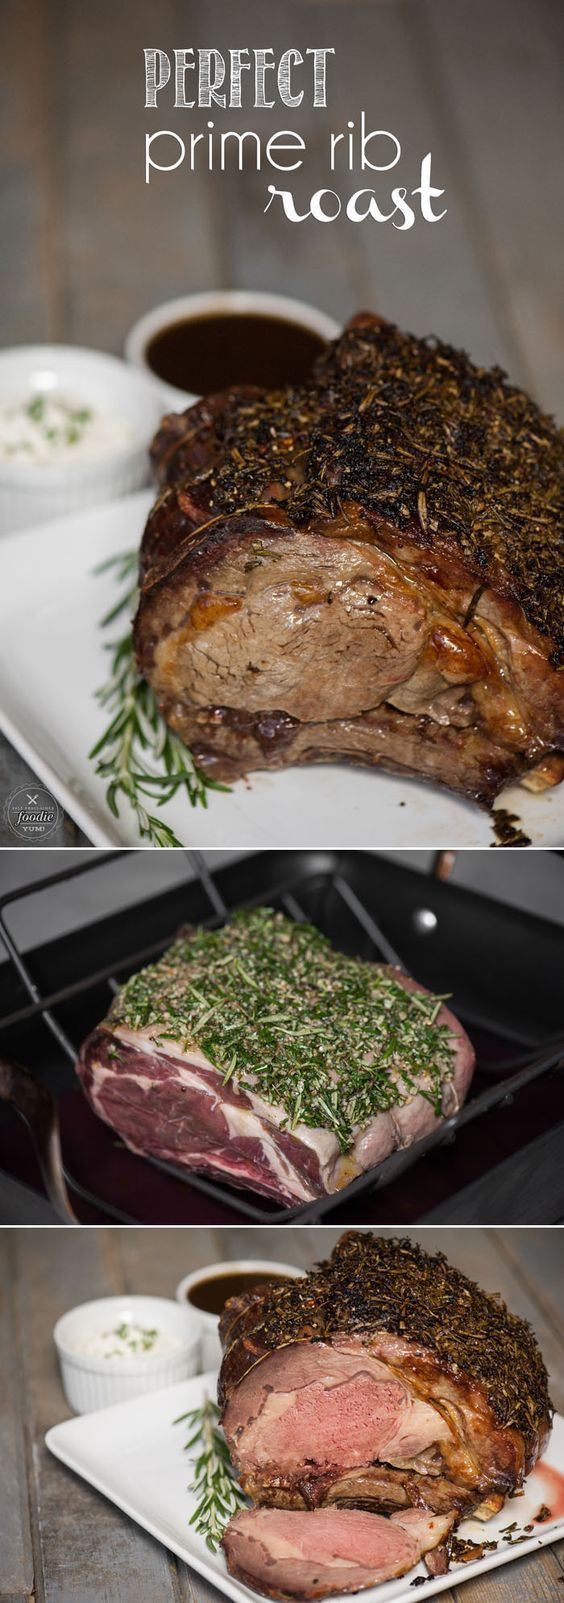 Side Dishes For Prime Rib Dinner Christmas
 17 Best ideas about Prime Rib Roast on Pinterest